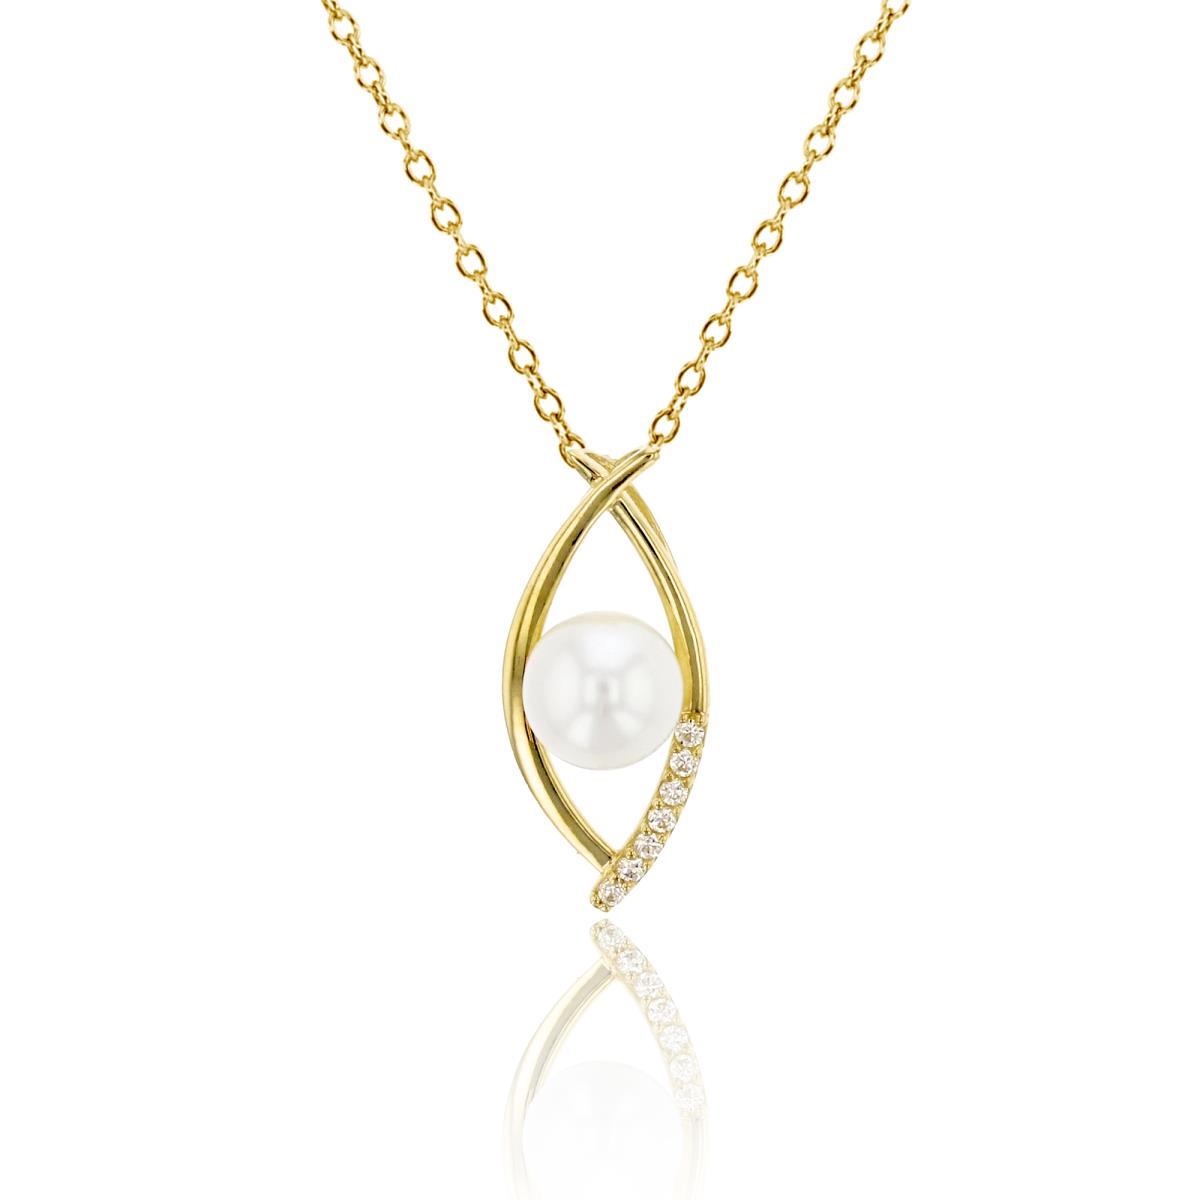 10K Yellow Gold 5mm Fresh Water Pearl & CZ Open Leaf 18" Necklace